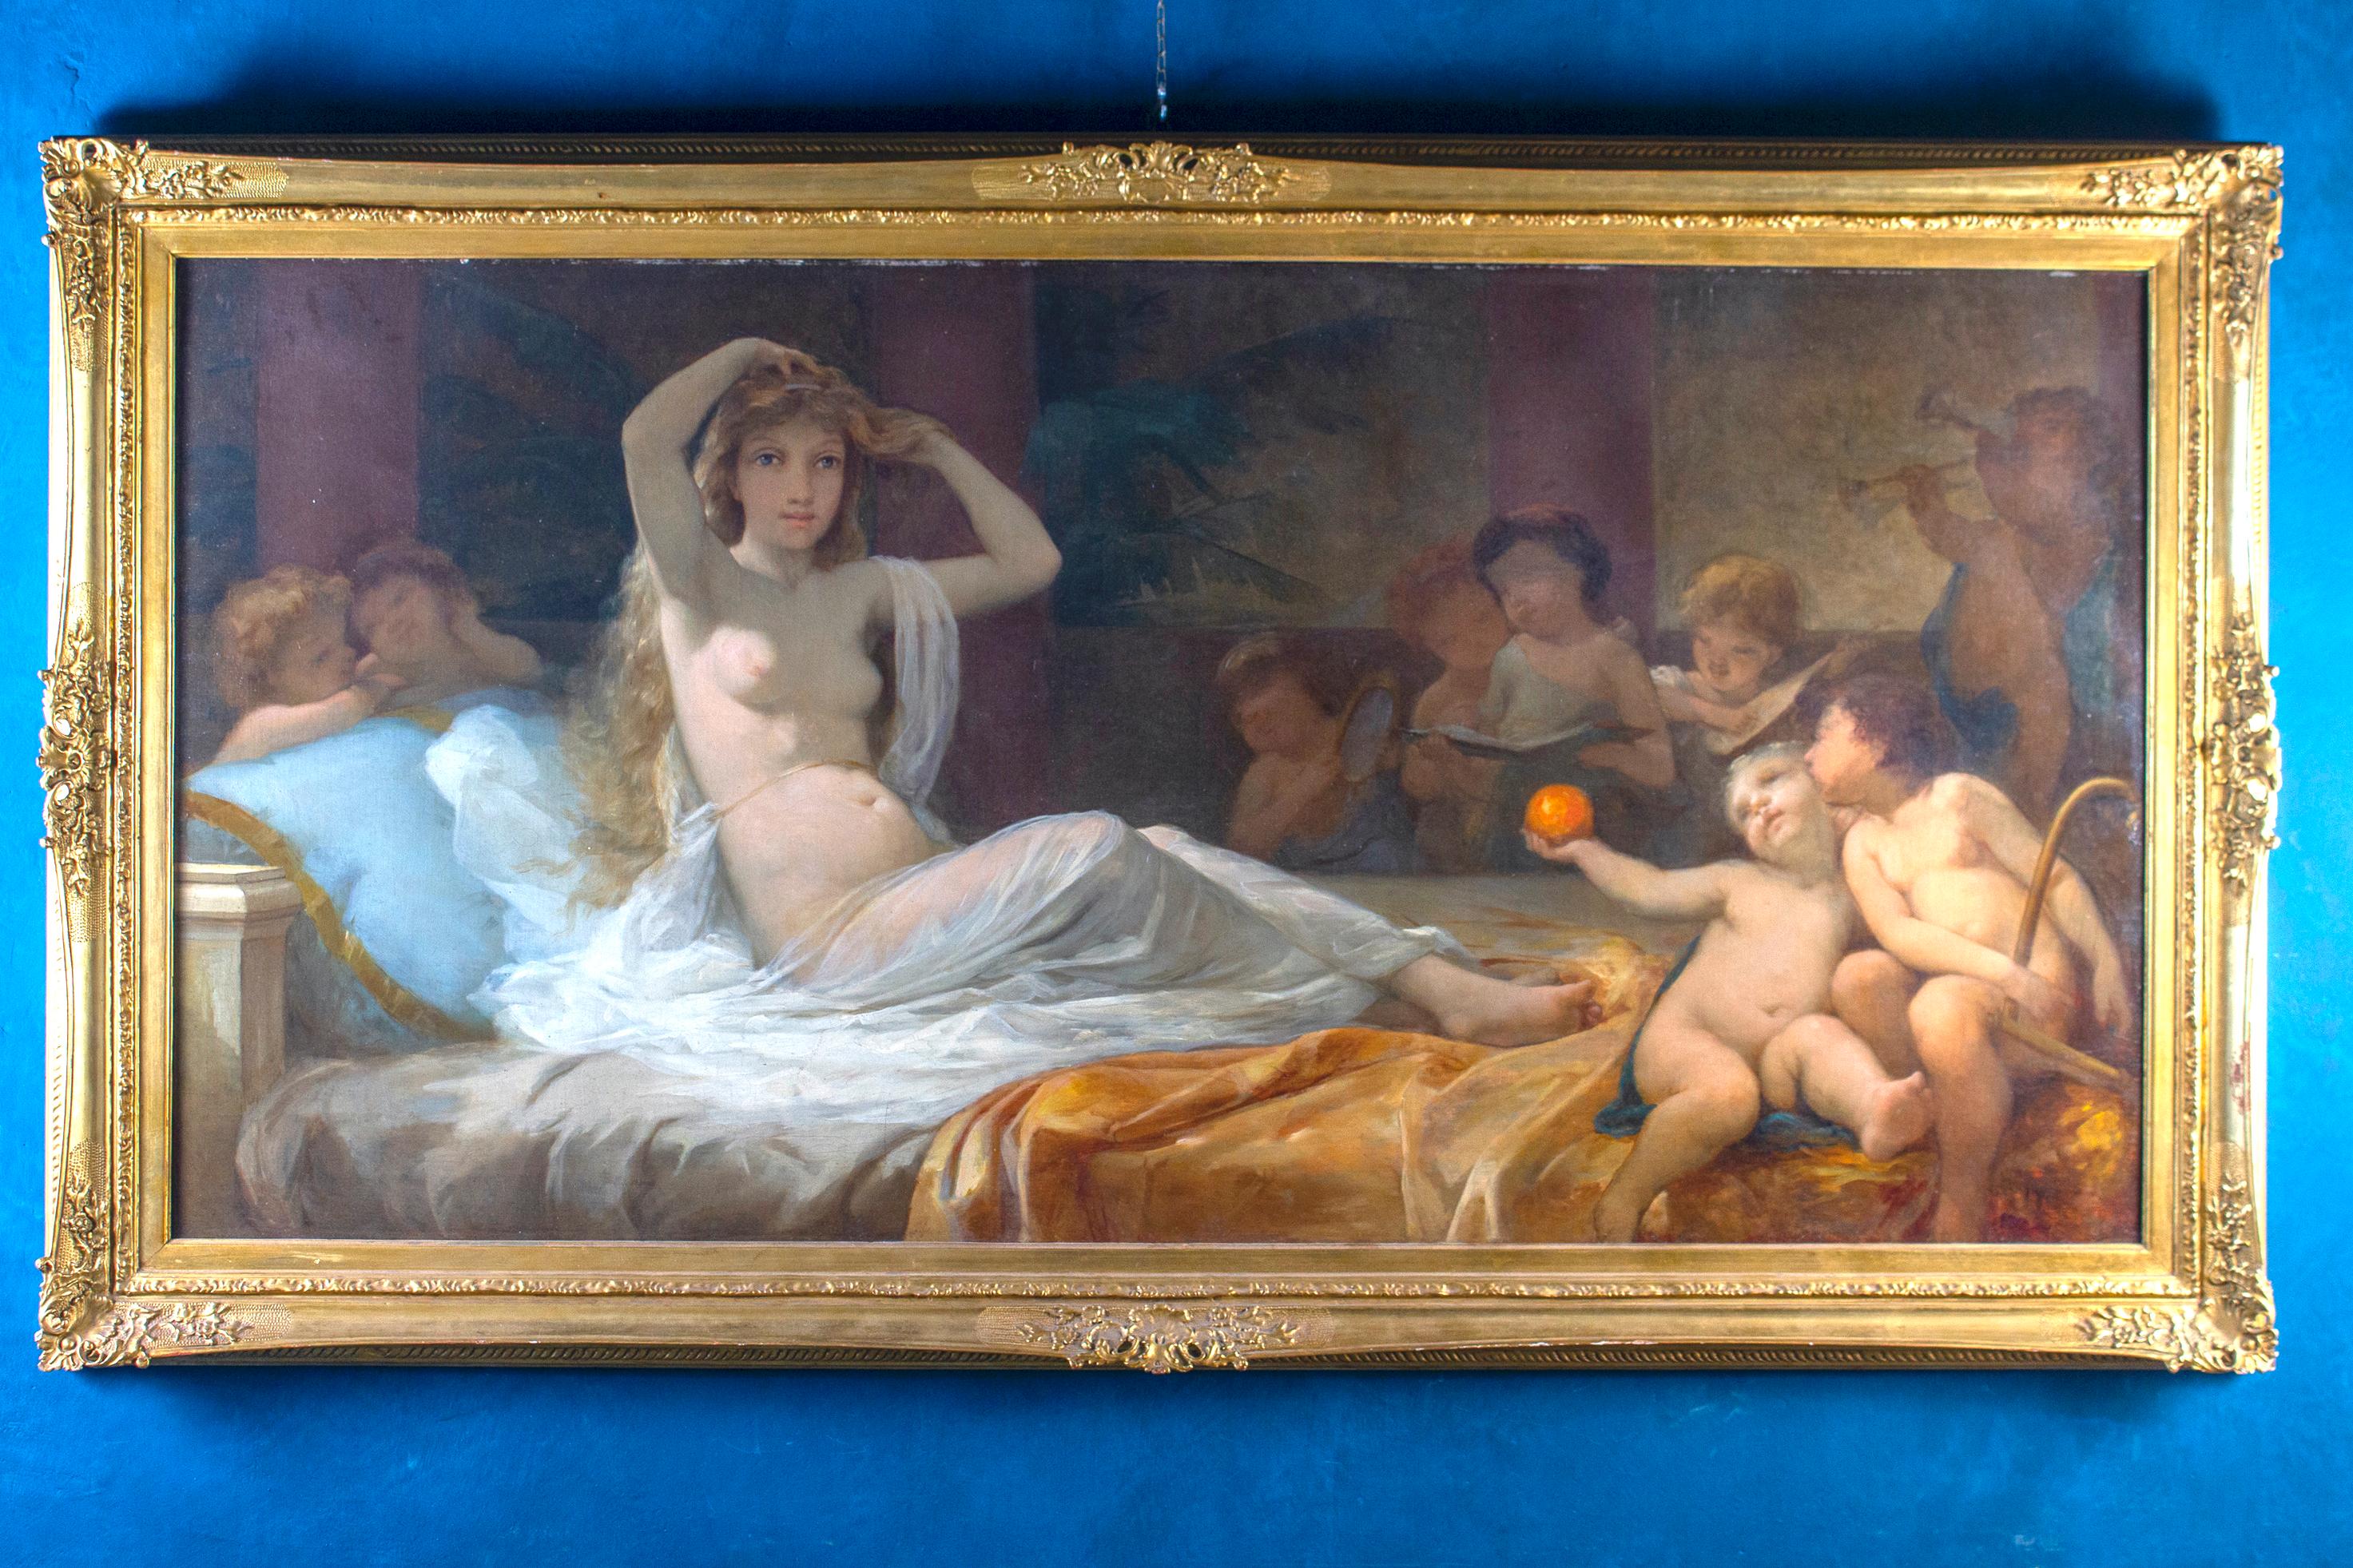 Unknown Nude Painting - Venus with Putti Oil on Canvas with Gilt-wood Frame 